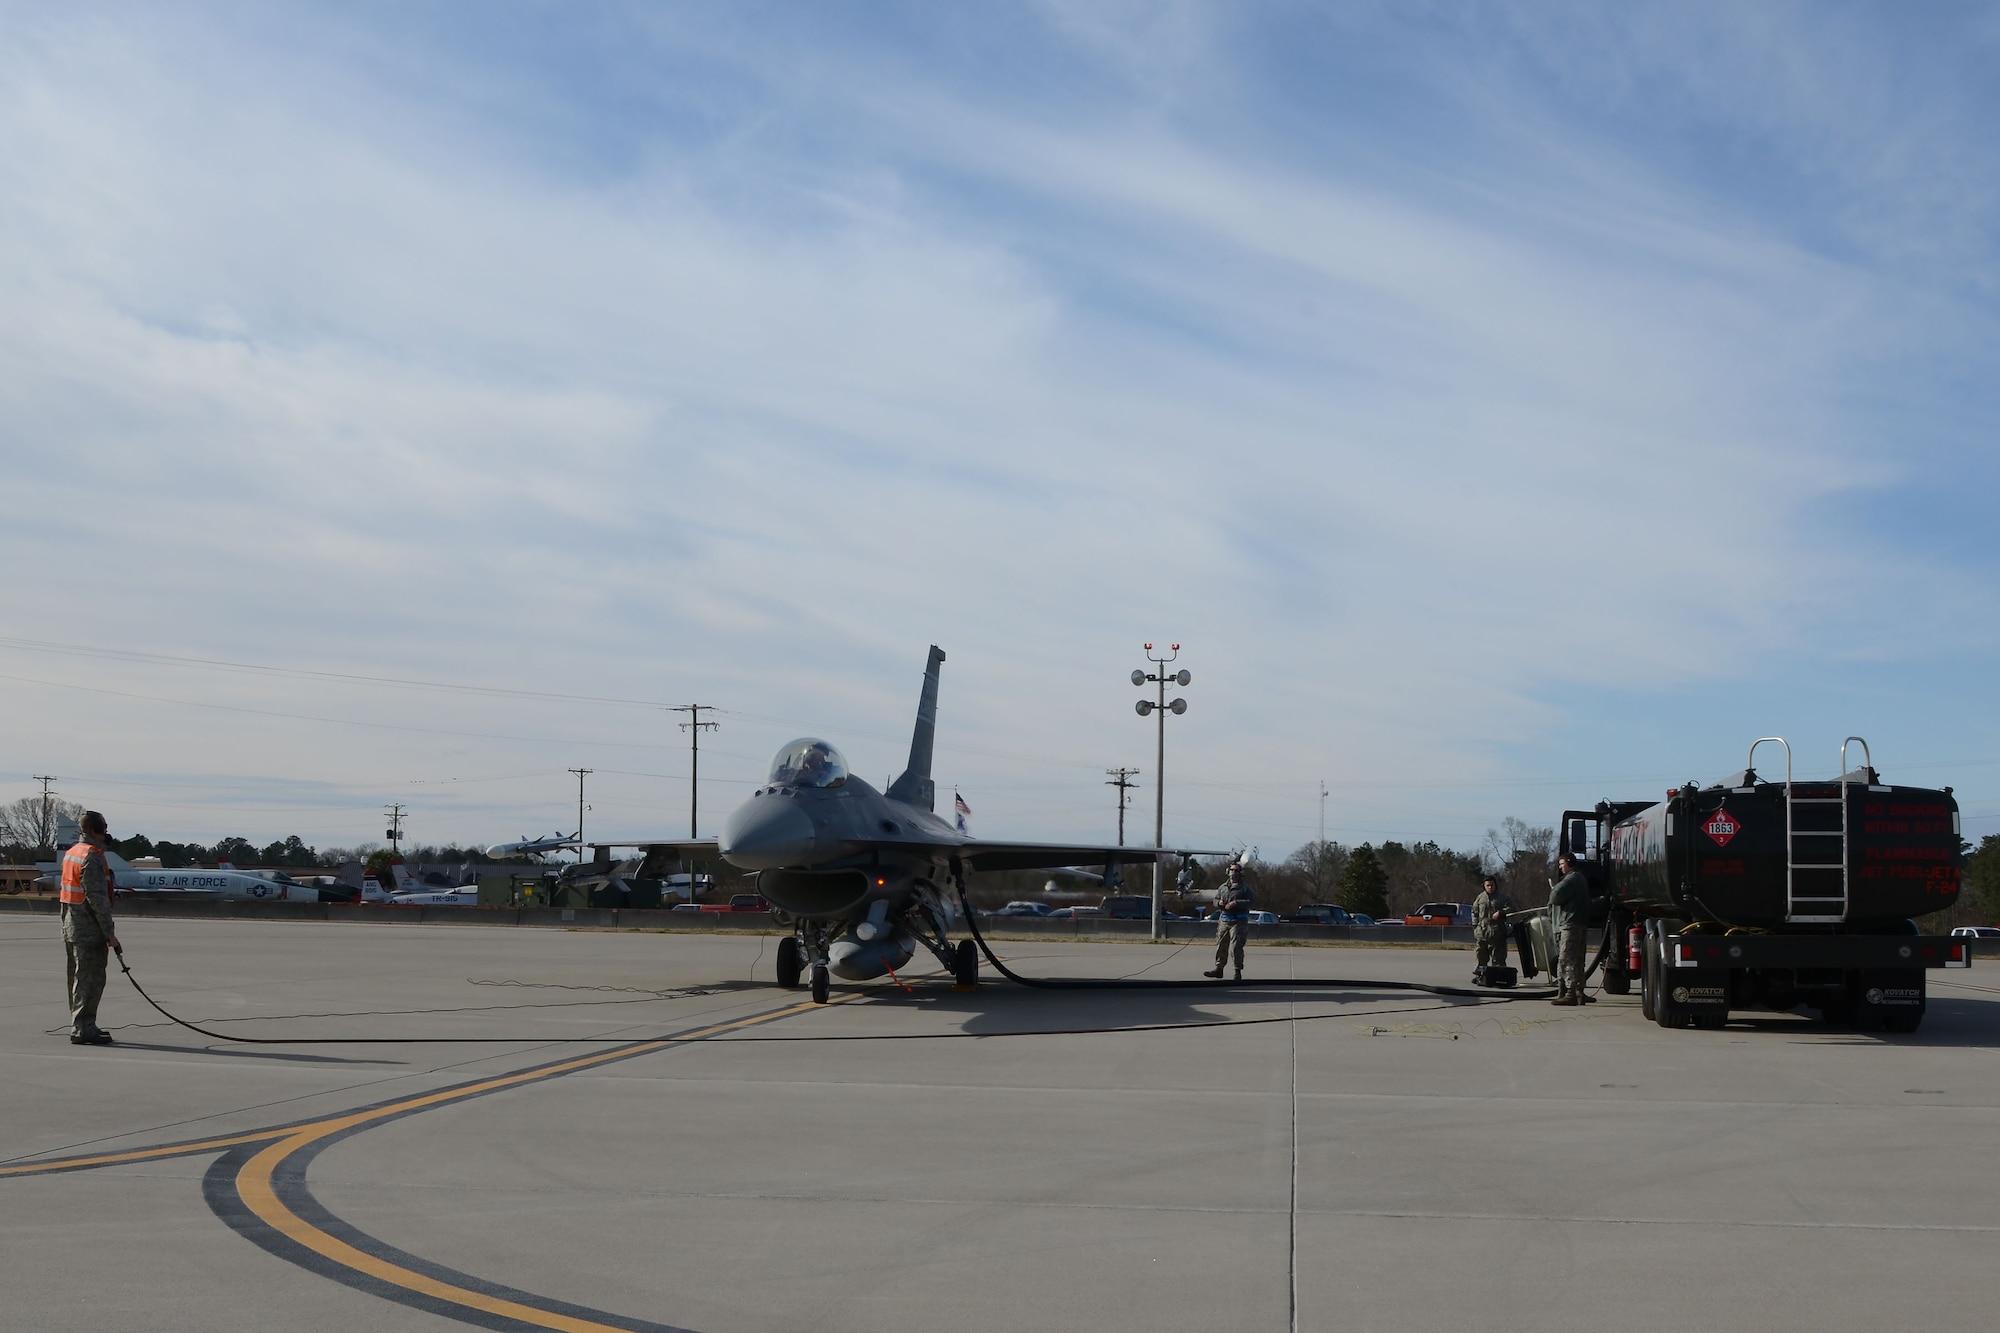 U.S. Air Force Airmen of the 169th Logistics Readiness Squadron and the 169th Aircraft Maintenance Squadron refuel two F-16 fighting falcon fighter jets during “hot-pit” ground refueling training on the flight line at McEntire Joint National Guard Base, S.C., Feb. 6, 2016.  Ground refueling, while the engine is running allows aircraft to return to flight quickly during sortie operations and combat missions. (U.S. Air National Guard photo by Senior Airman Ashleigh S. Pavelek)